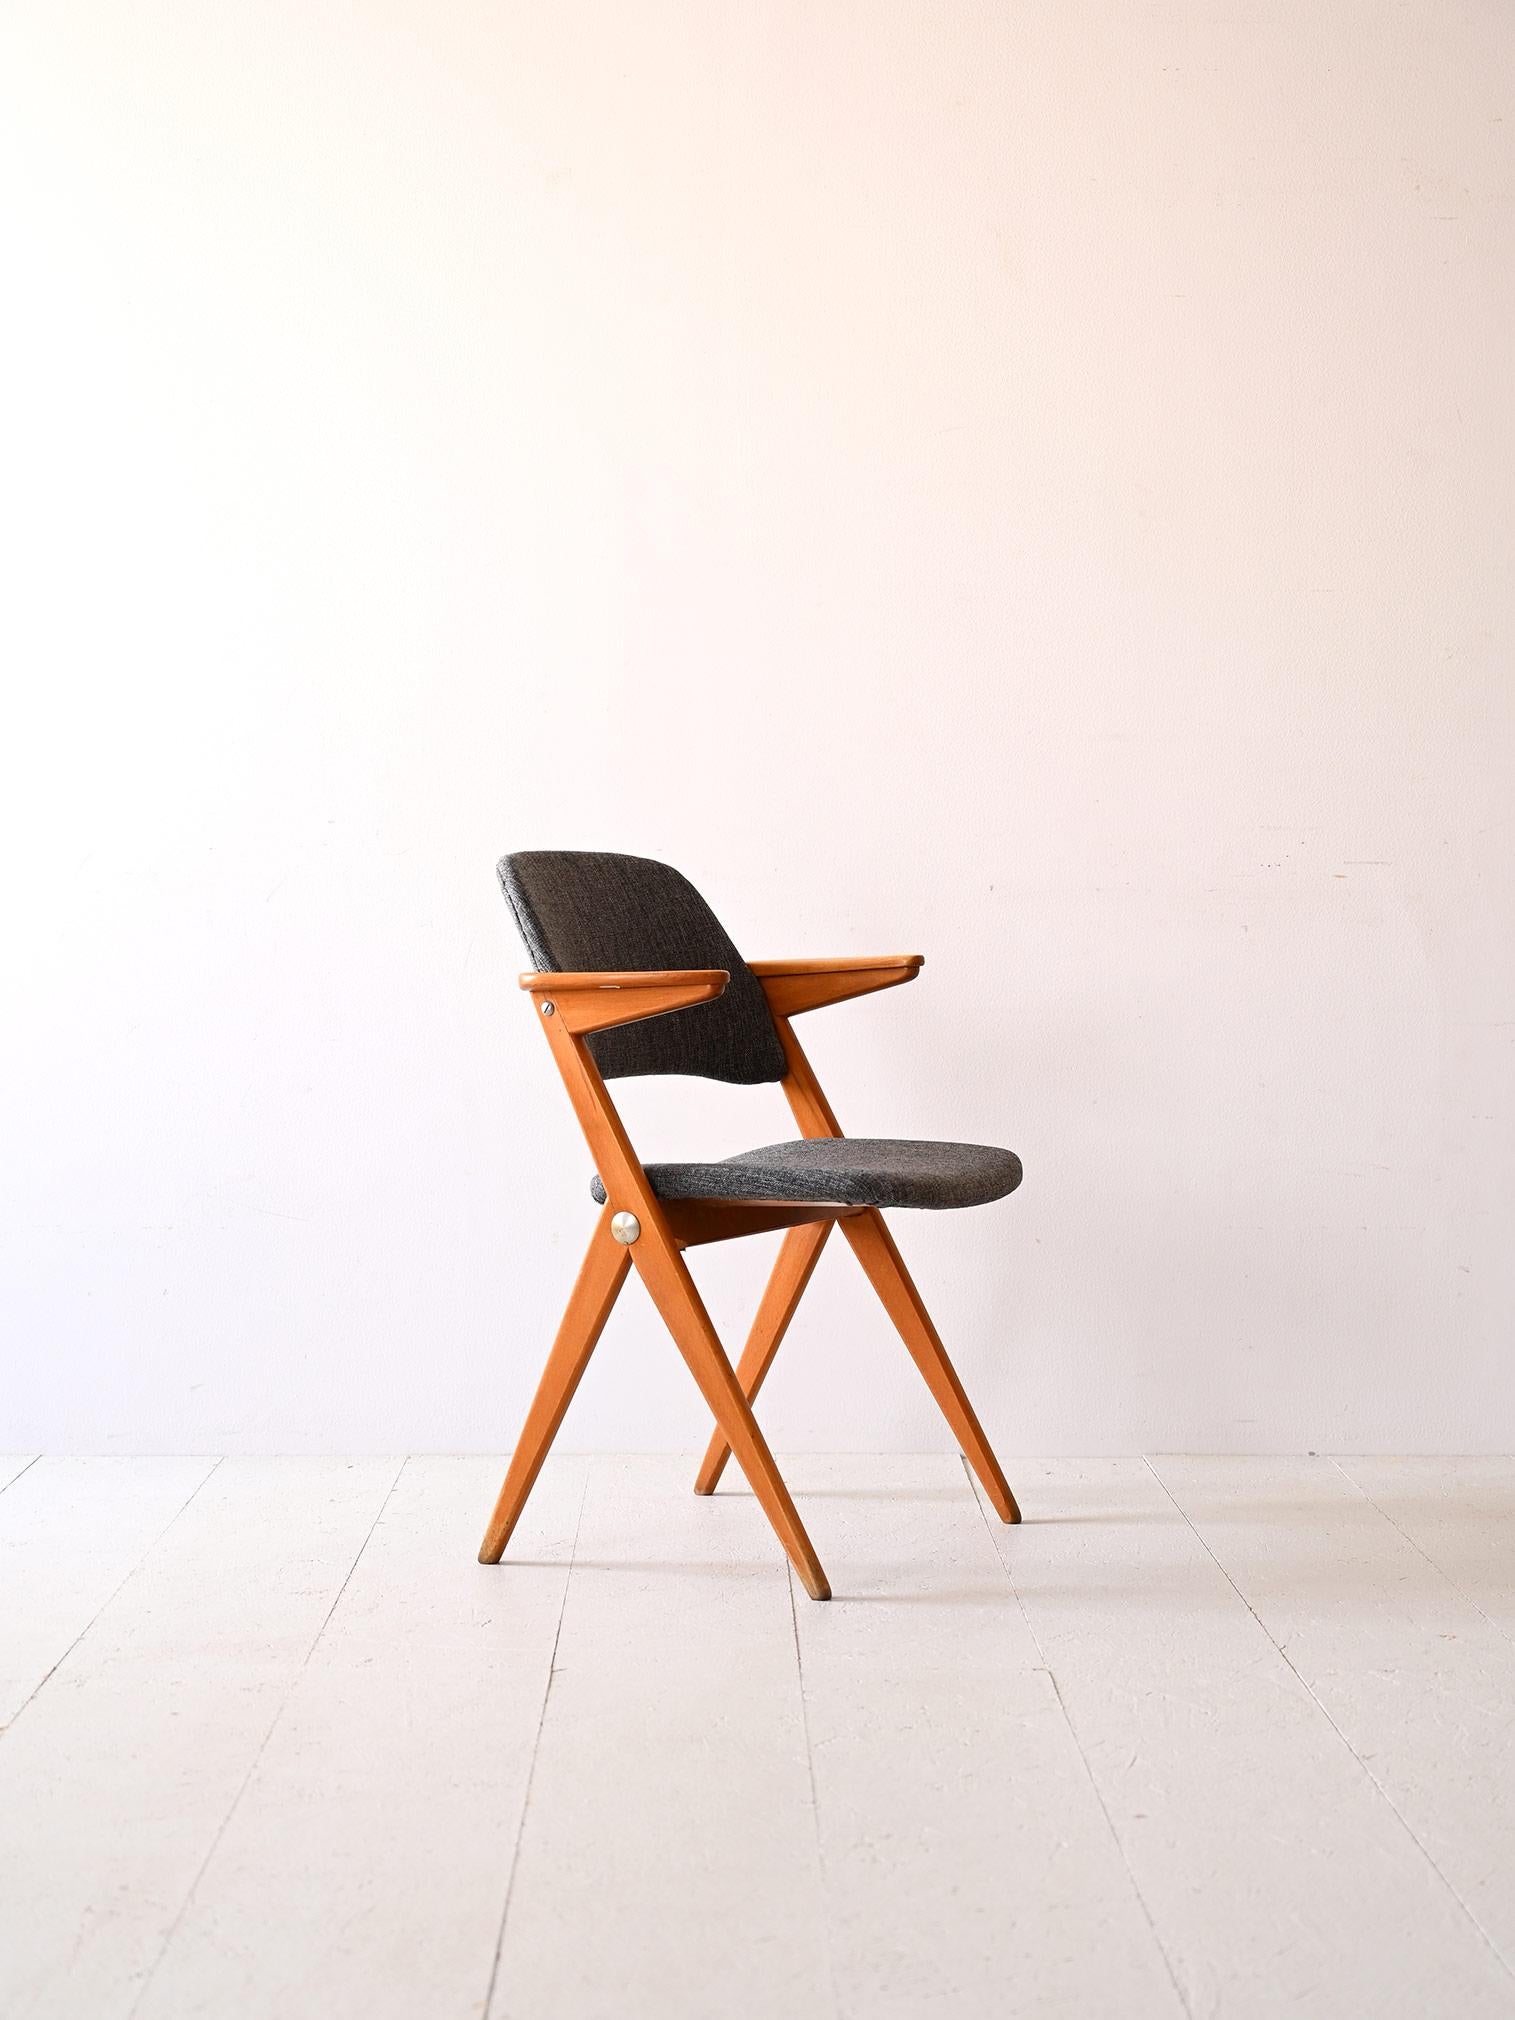 Chair with arms designed by Bengt Ruda for Nordiska Kompaniet in the 1950s.

The seat has been lined and reupholstered with dirt-resistant 'aquaclean' fabric.

Good condition. It may show some signs of time. Please pay attention to the